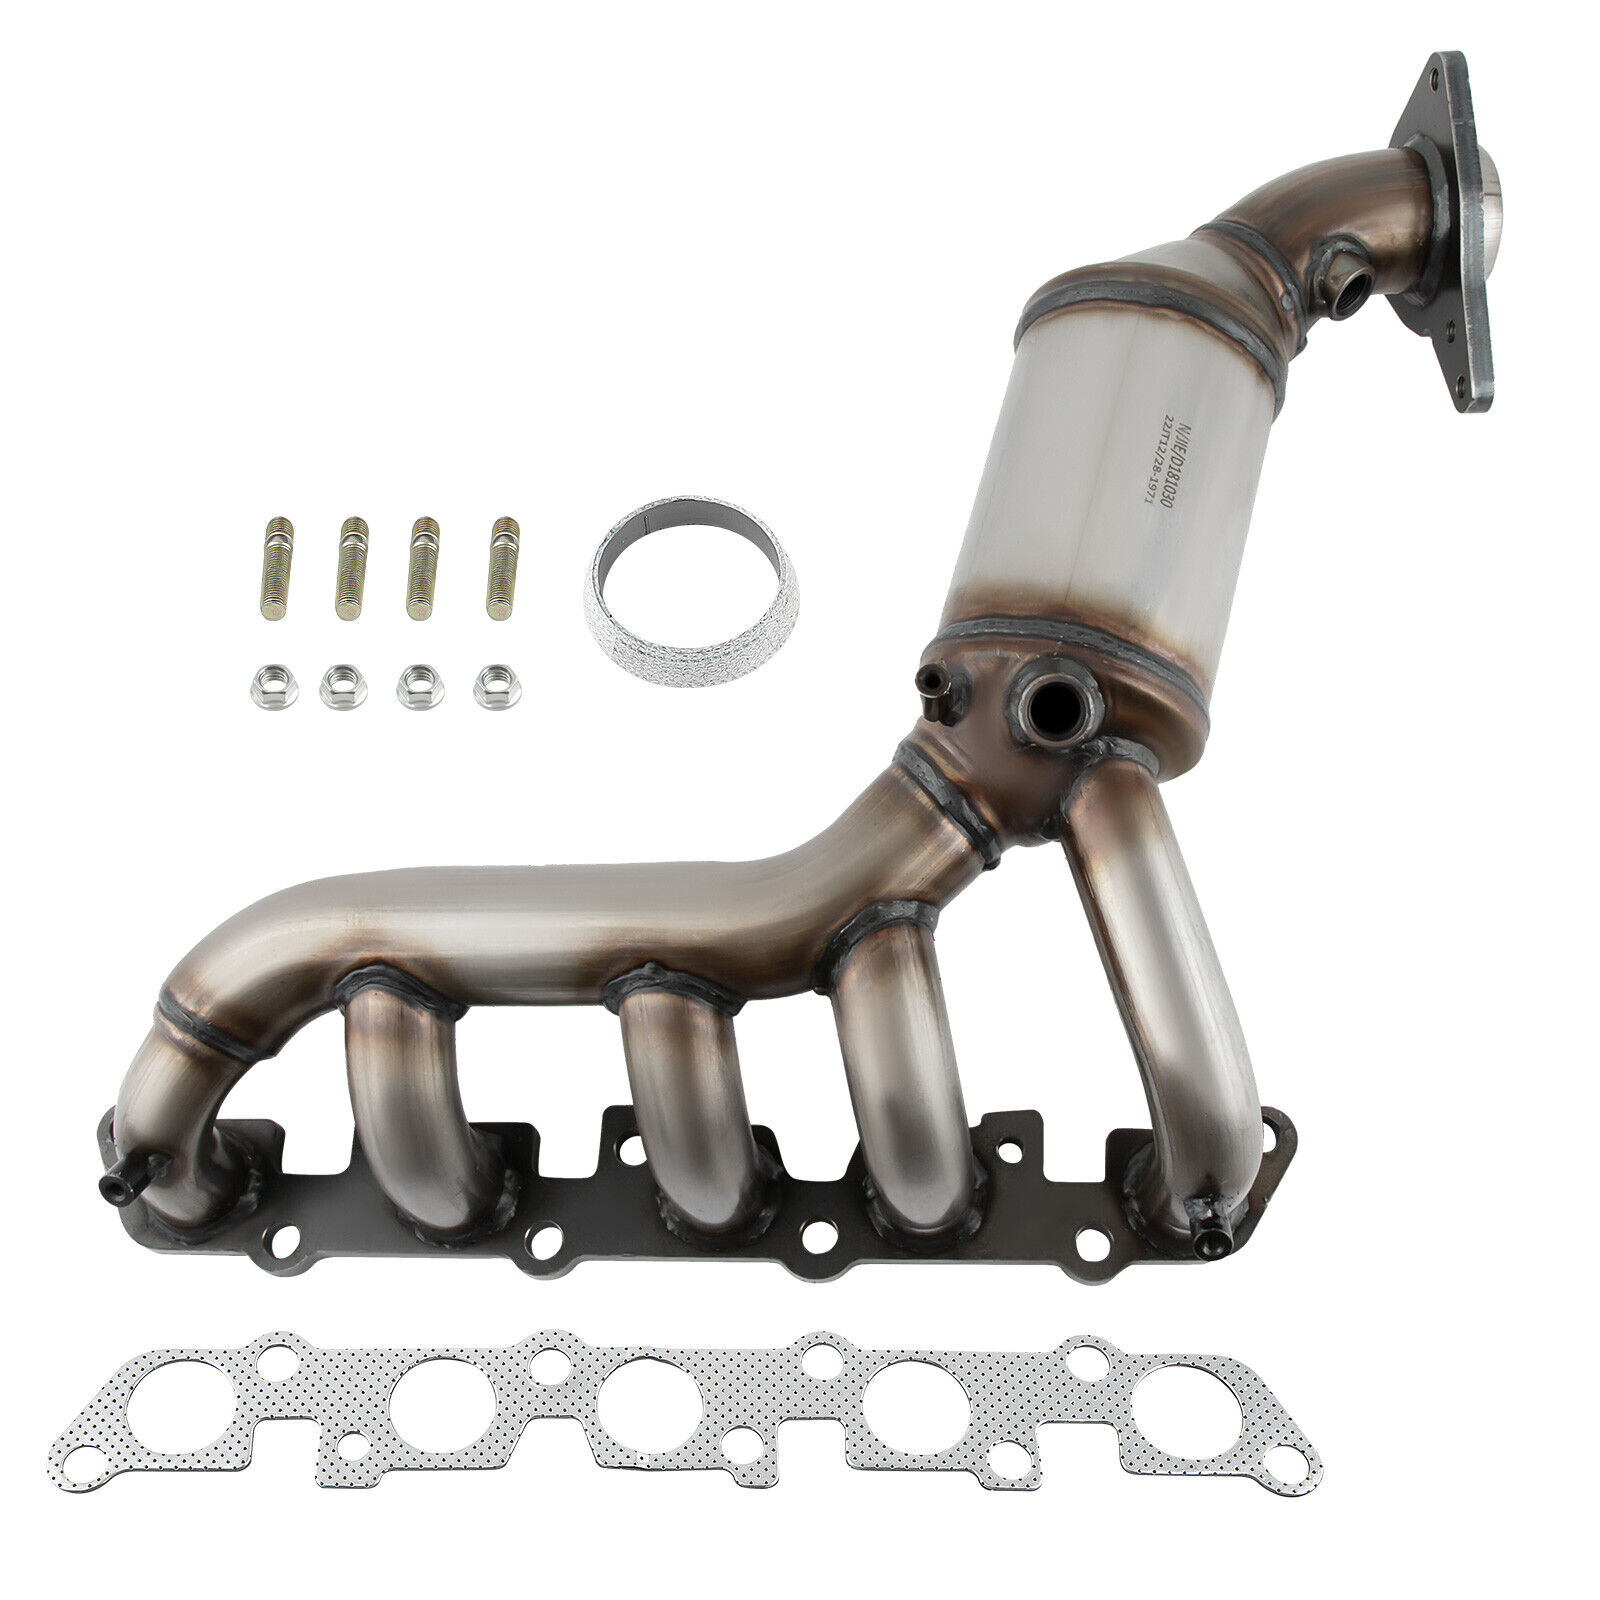 EPA Catalytic Converter Exhaust Manifold for Hummer H3 3.7L 2007-2008 674-989